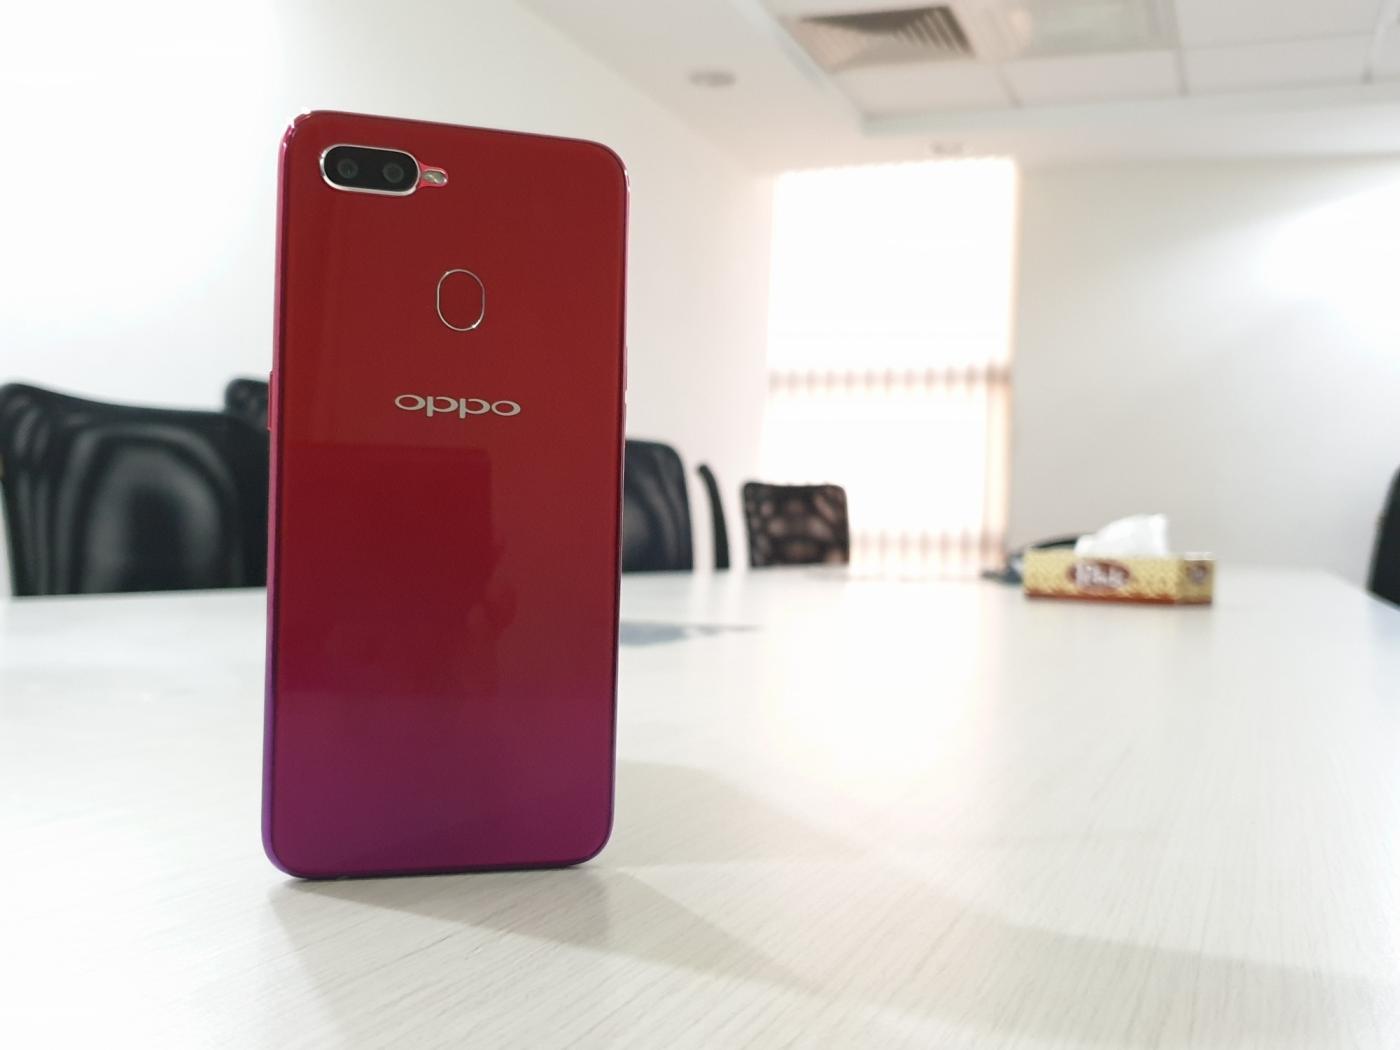 OPPO has now brought the popular water-drop notch trend in F9 Pro that costs Rs 23,990 for a configuration of 6GB RAM and 64GB internal storage. (Photo: IANS) by .